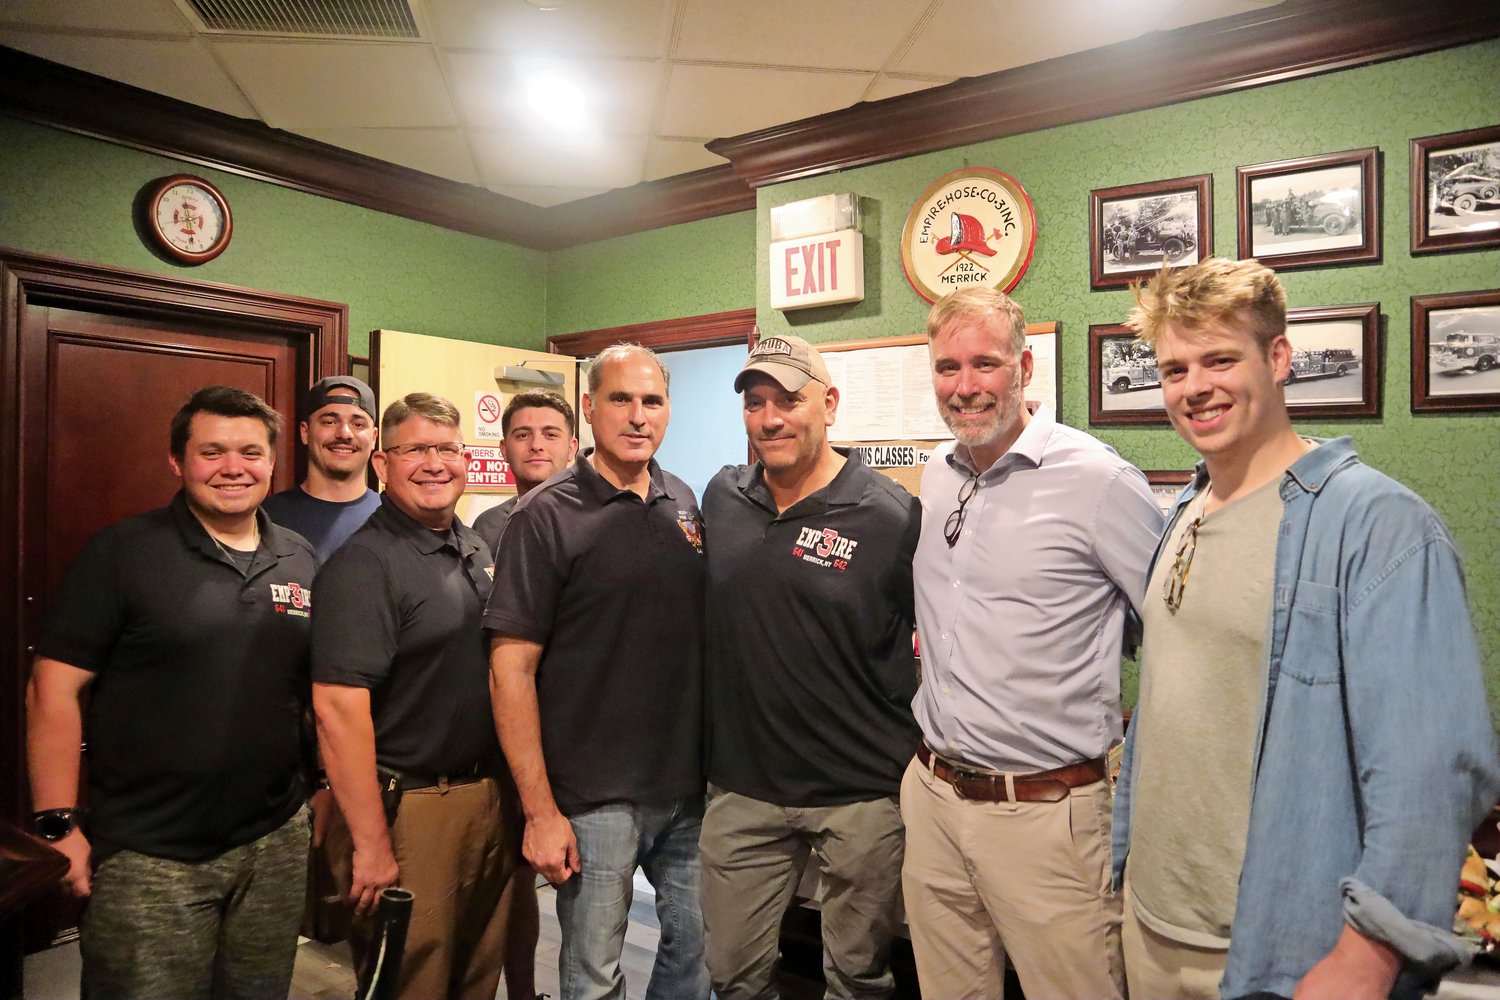 Firefighters, from left, Connor Clement, Lucas Gerrato, former Chief Chris Clement, firefighter Kyle Radtke and Ron Luparello, with firefighter and Big Media CEO Jon Loew, Phil Reilly and Reilly’s son.